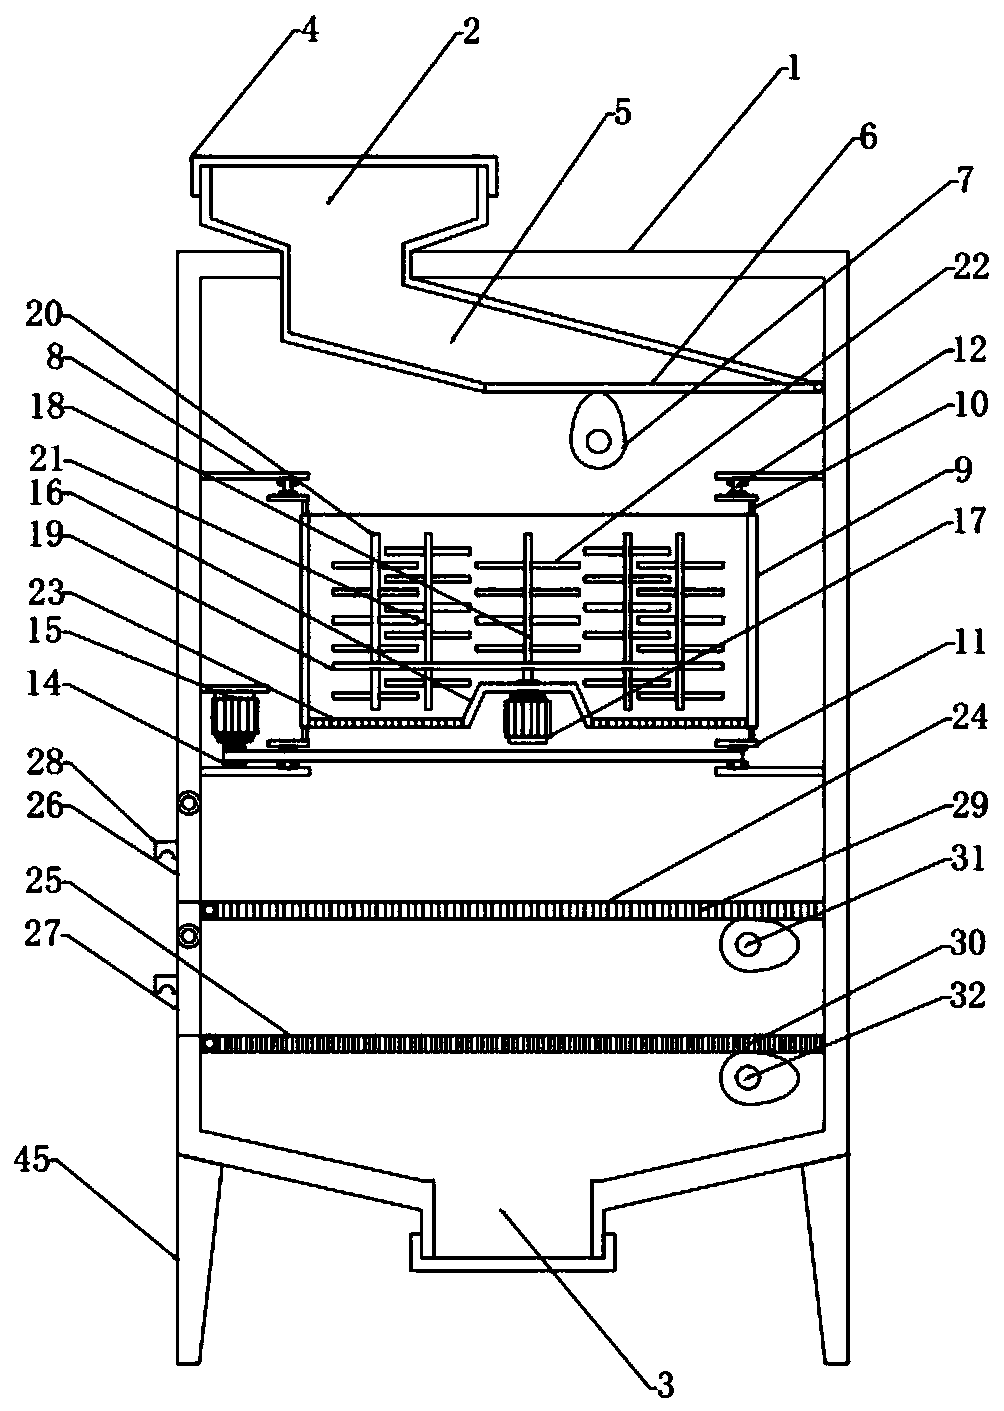 A sorting and collecting device for feed crushing